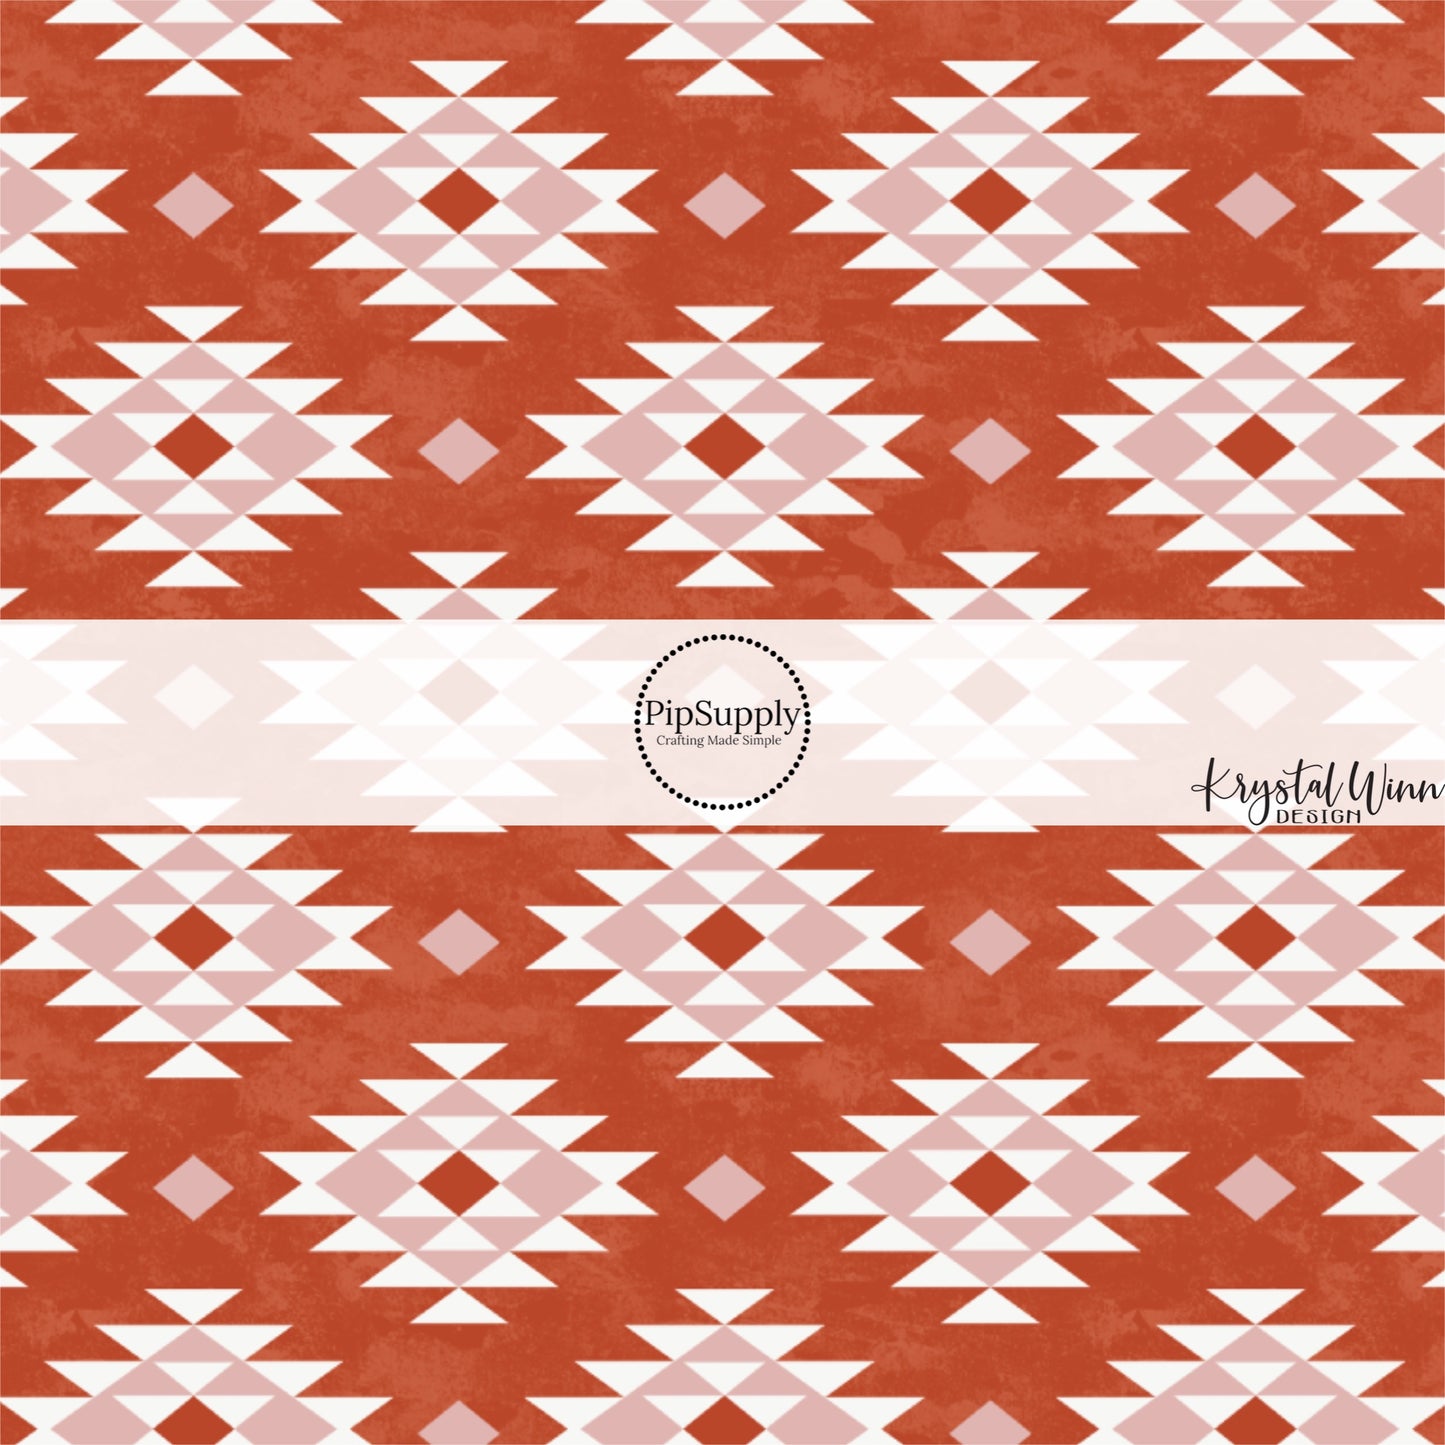 These holiday pattern themed fabric by the yard features Western aztec pattern in rust, light pink, and ivory. This fun Christmas fabric can be used for all your sewing and crafting needs!